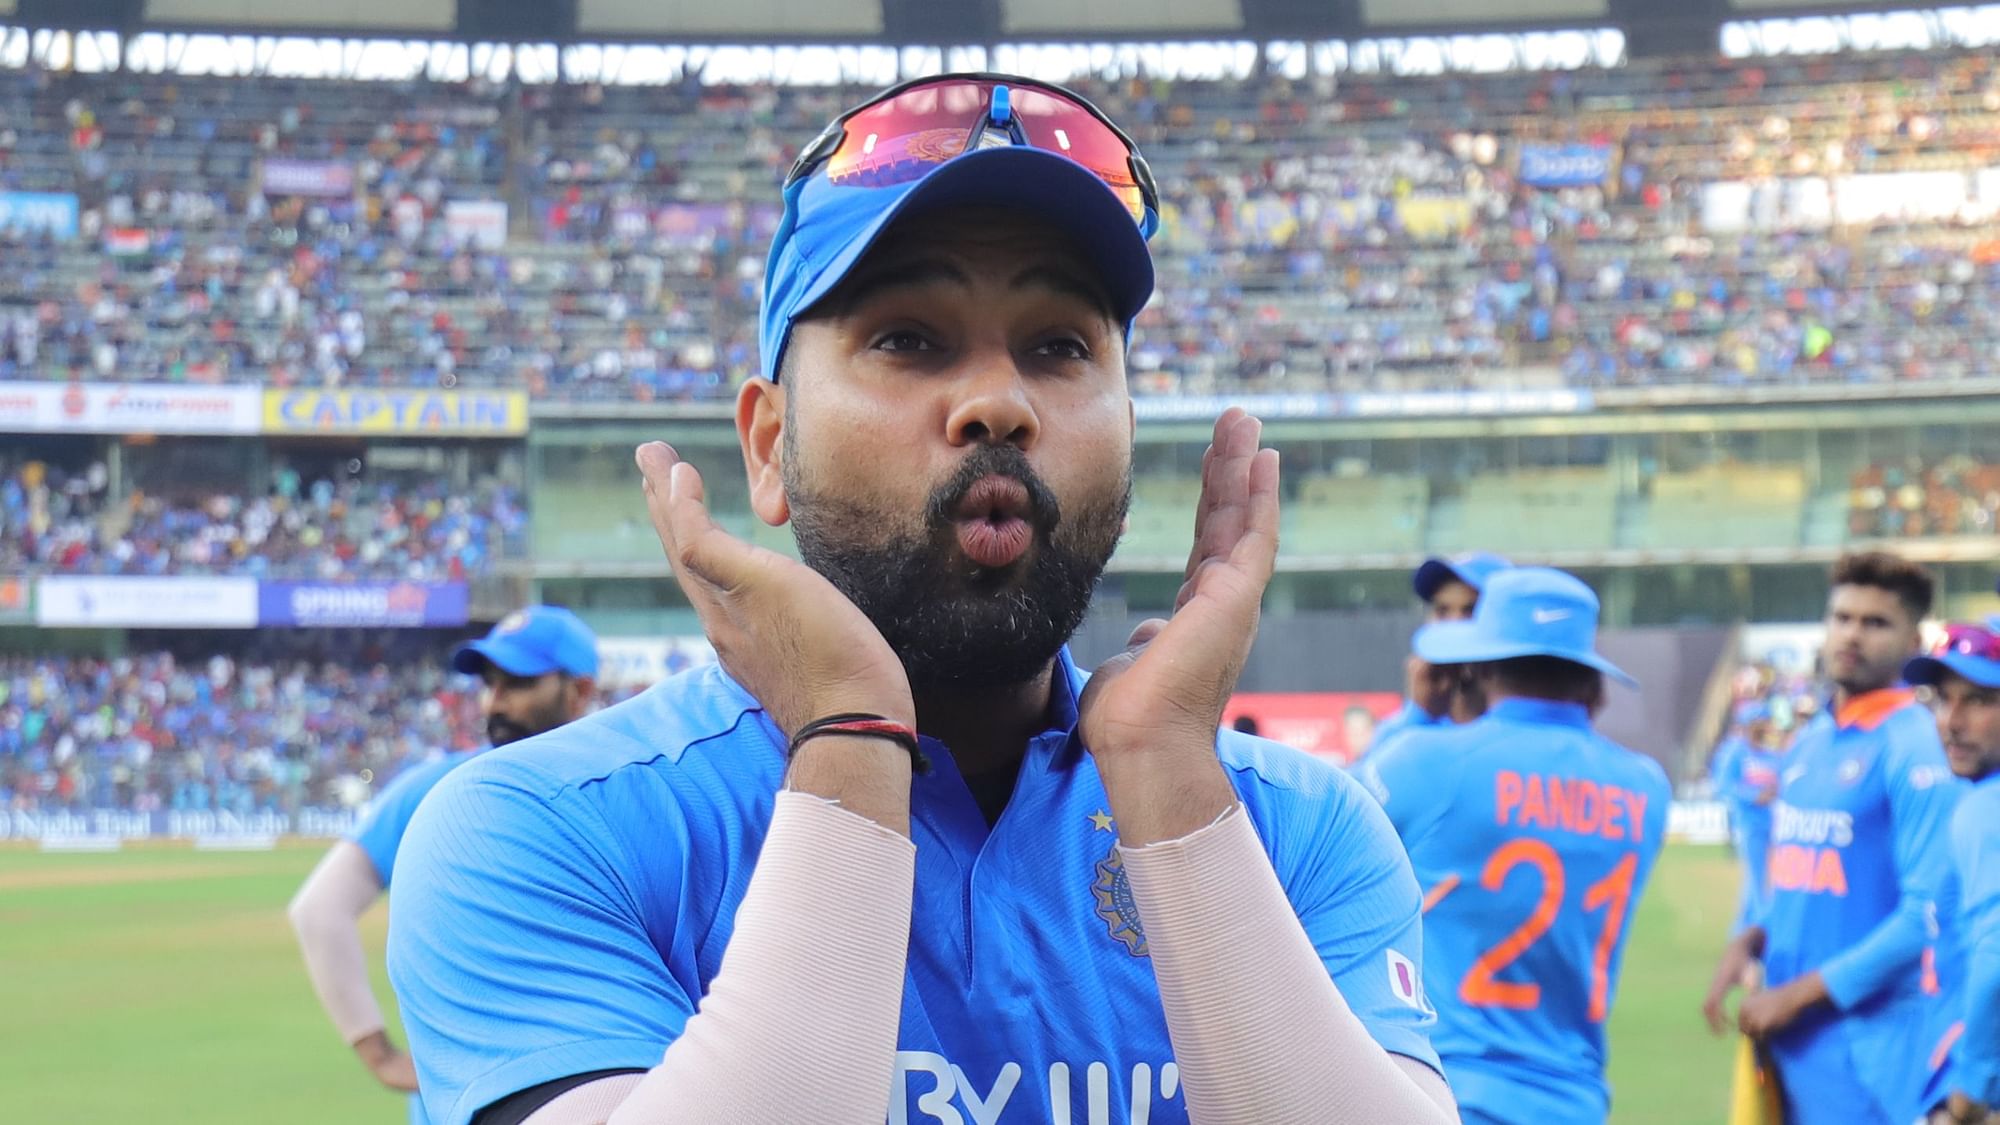 Rohit Sharma posted a message saying his 33rd birthday was a day of mixed emotions.